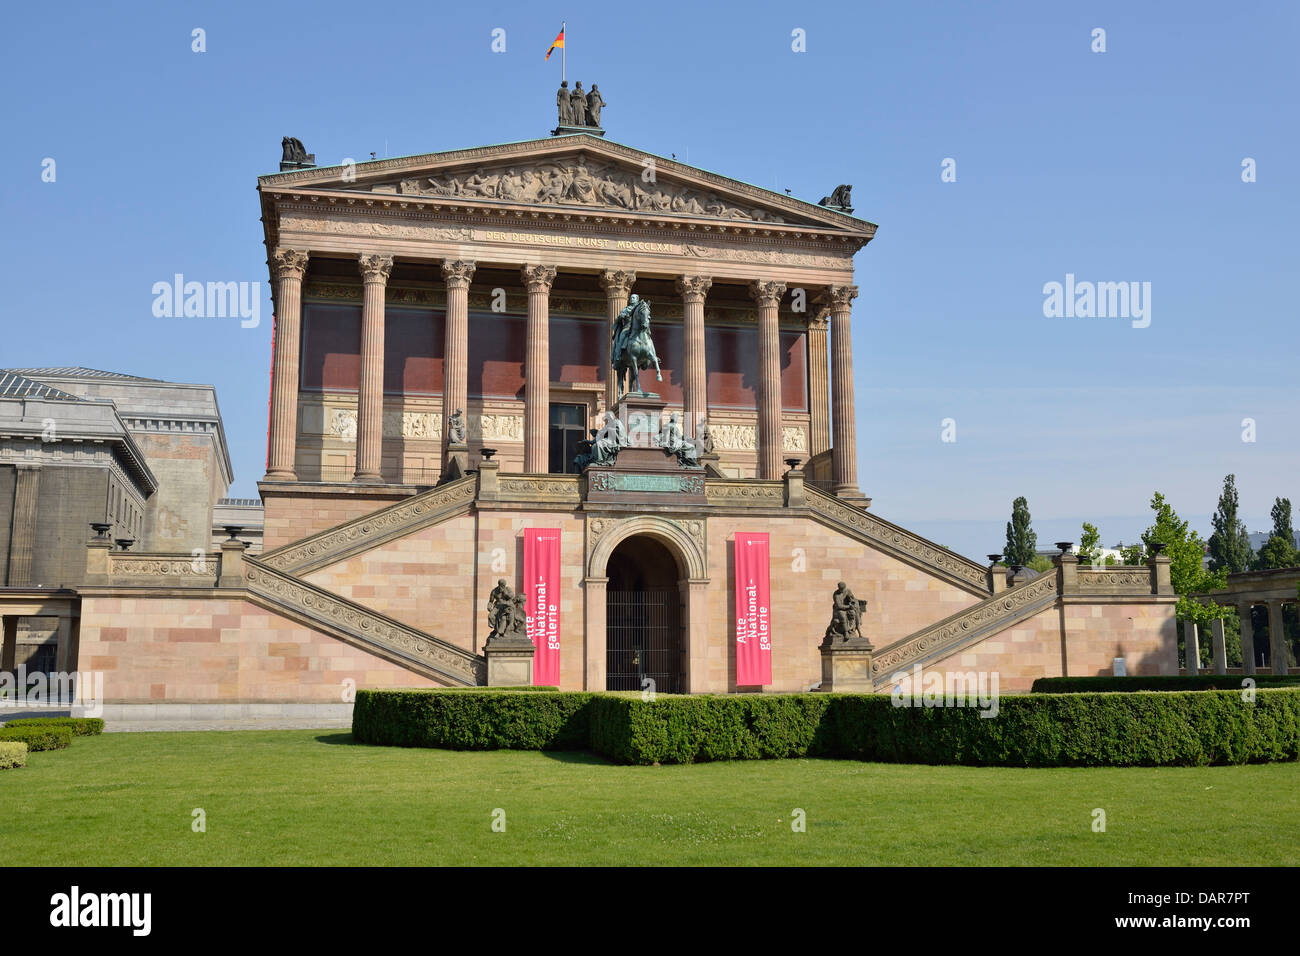 Berlin. Germany. Exterior of the Alte Nationalgalerie, Old National Gallery, designed by Friedrich August Stüler and Carl Busse, completed 1872. Stock Photo